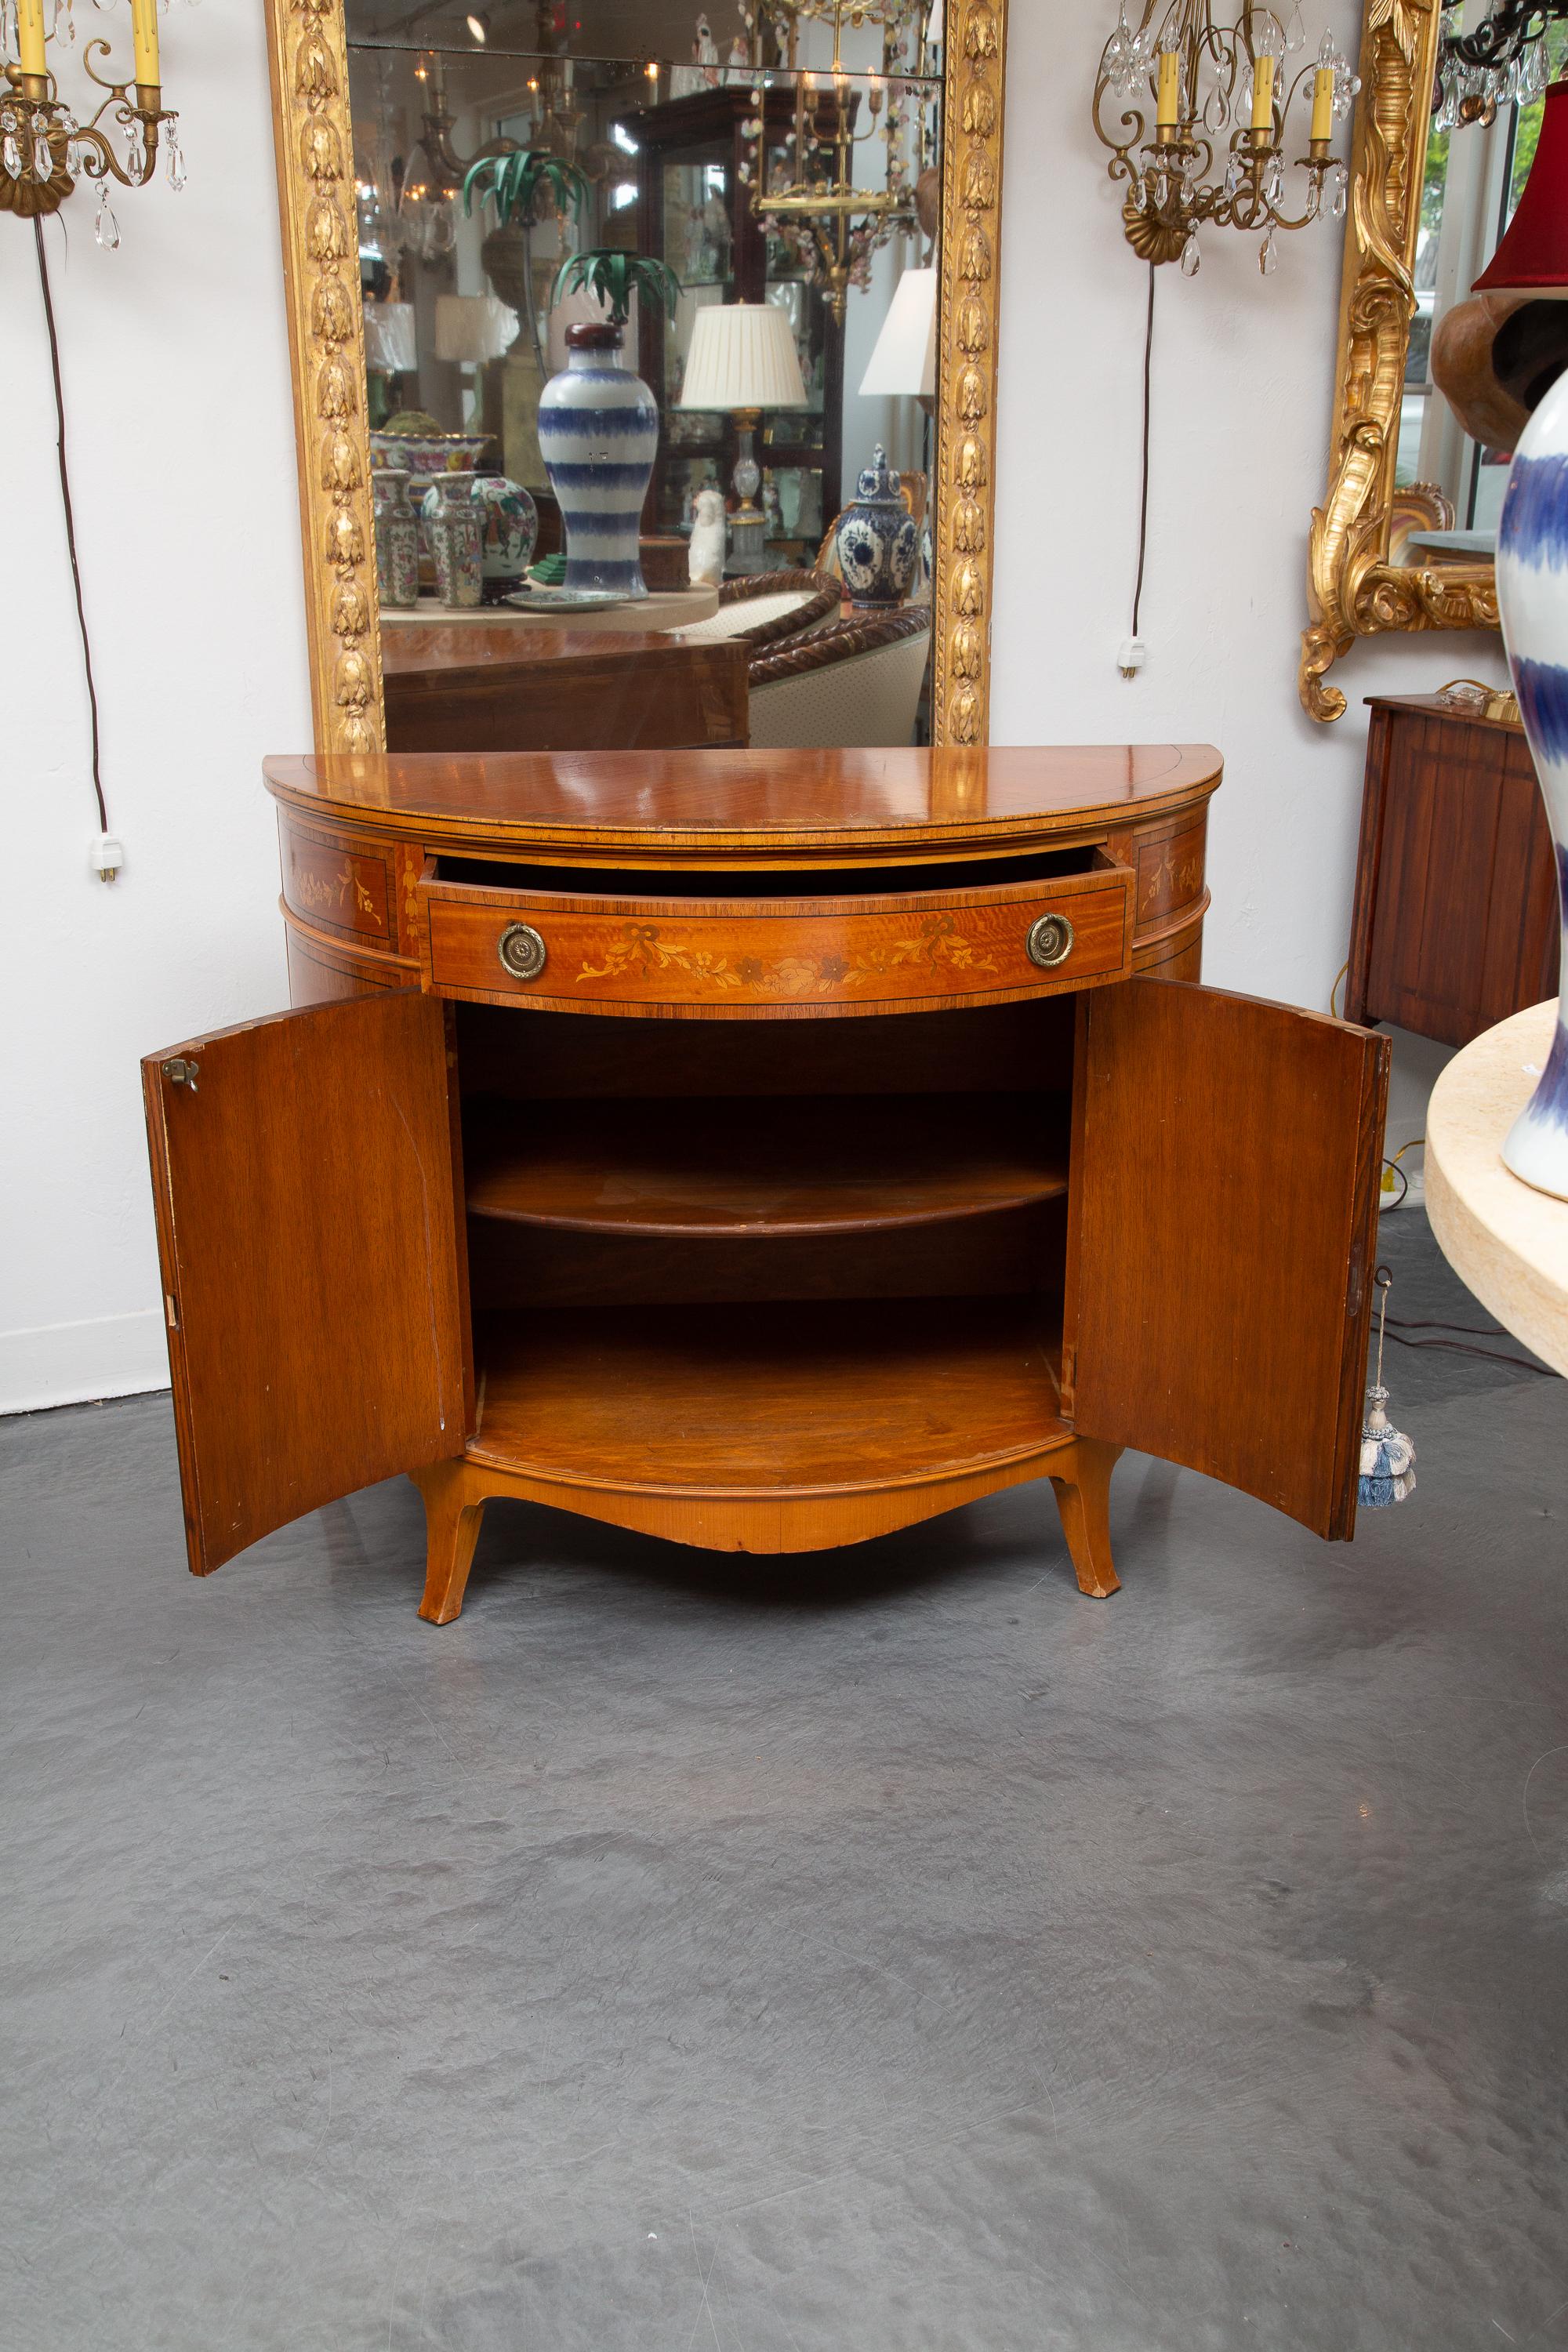 This is a lovely English Adams style mahogany bow front chest with satinwood inlay. The wood top is over a large inlaid drawer about two inlaid cabinet doors. The case piece is raised on splay feet, 20th century.